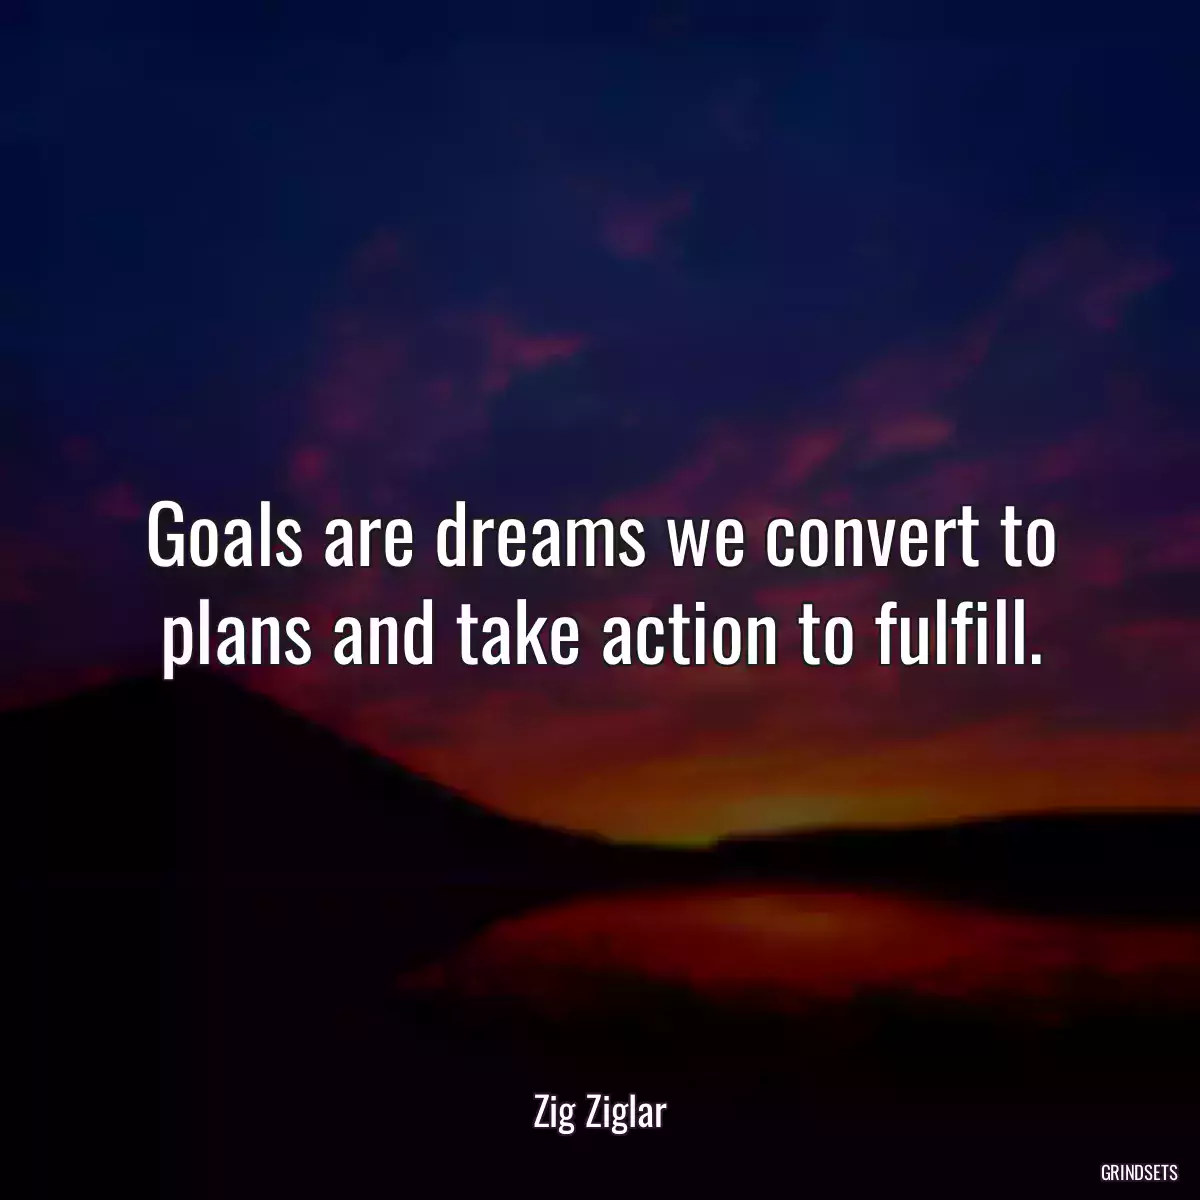 Goals are dreams we convert to plans and take action to fulfill.